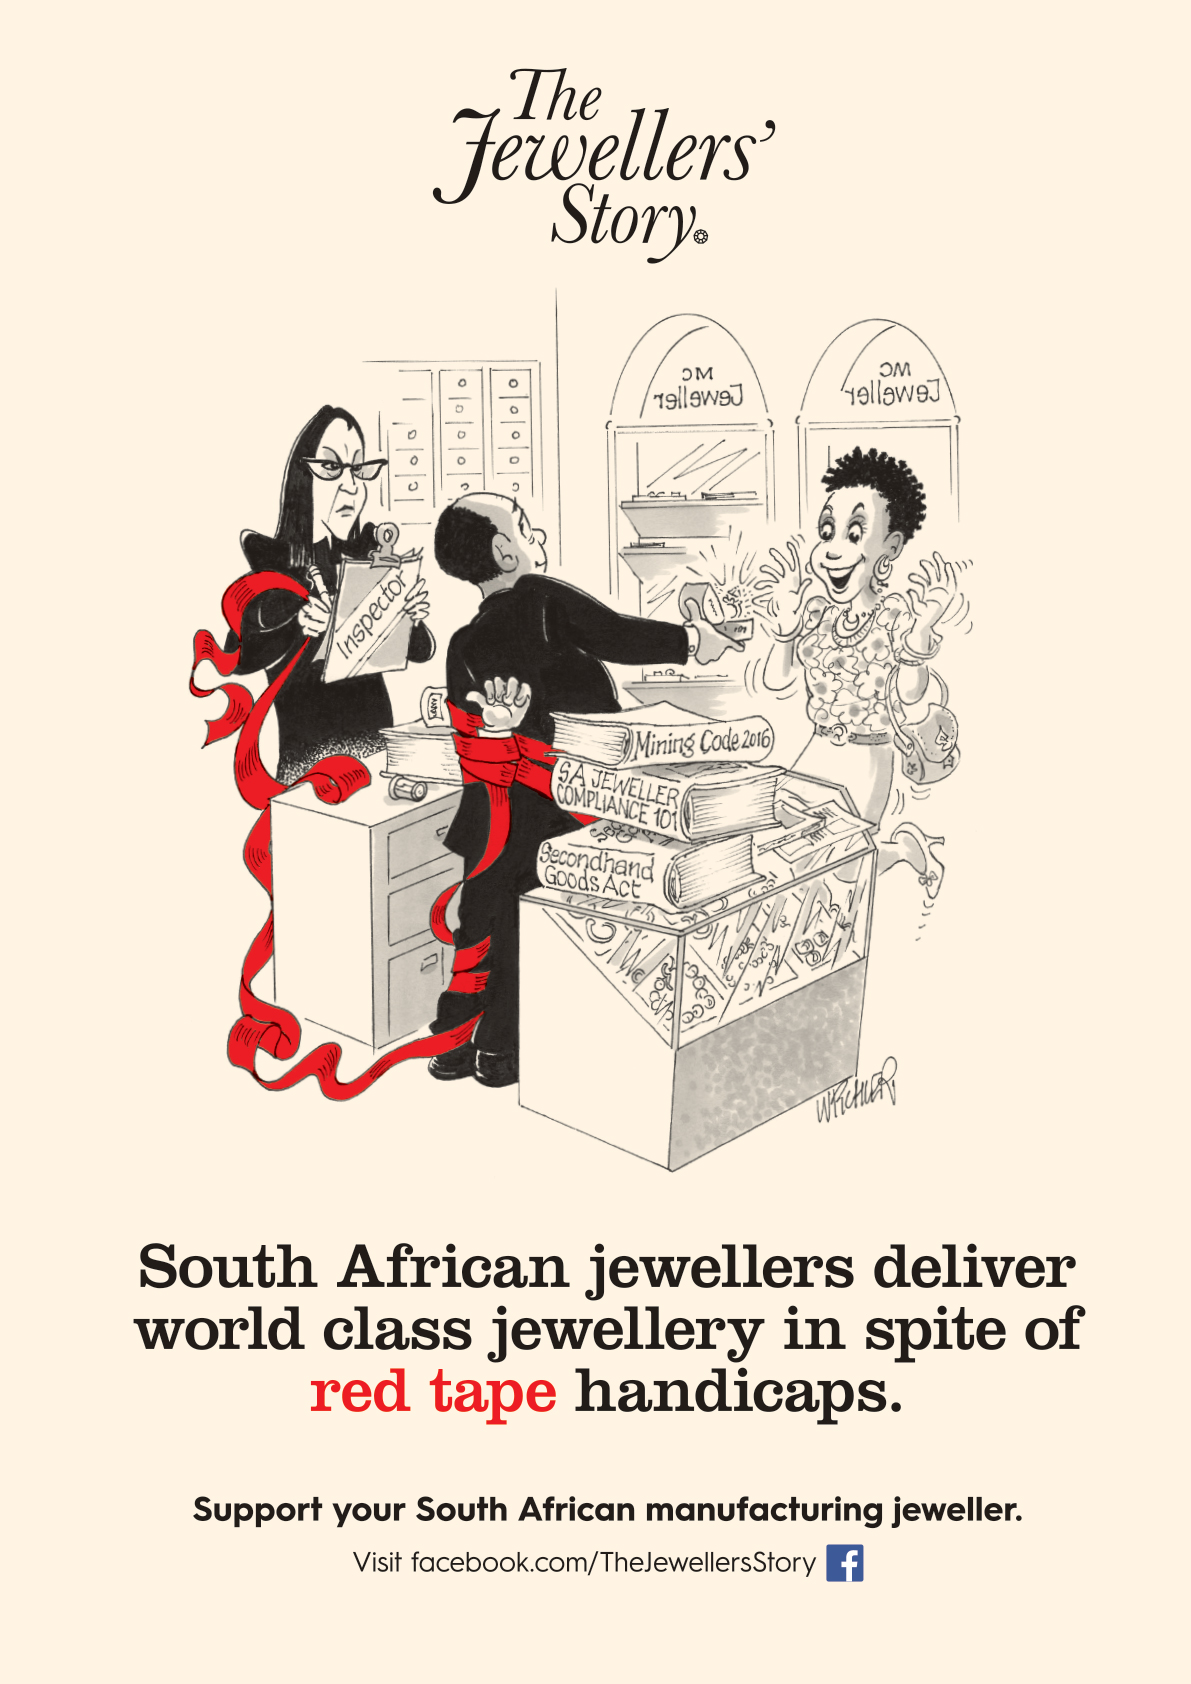 Delivering world class jewellery in spite of red  tape handicaps